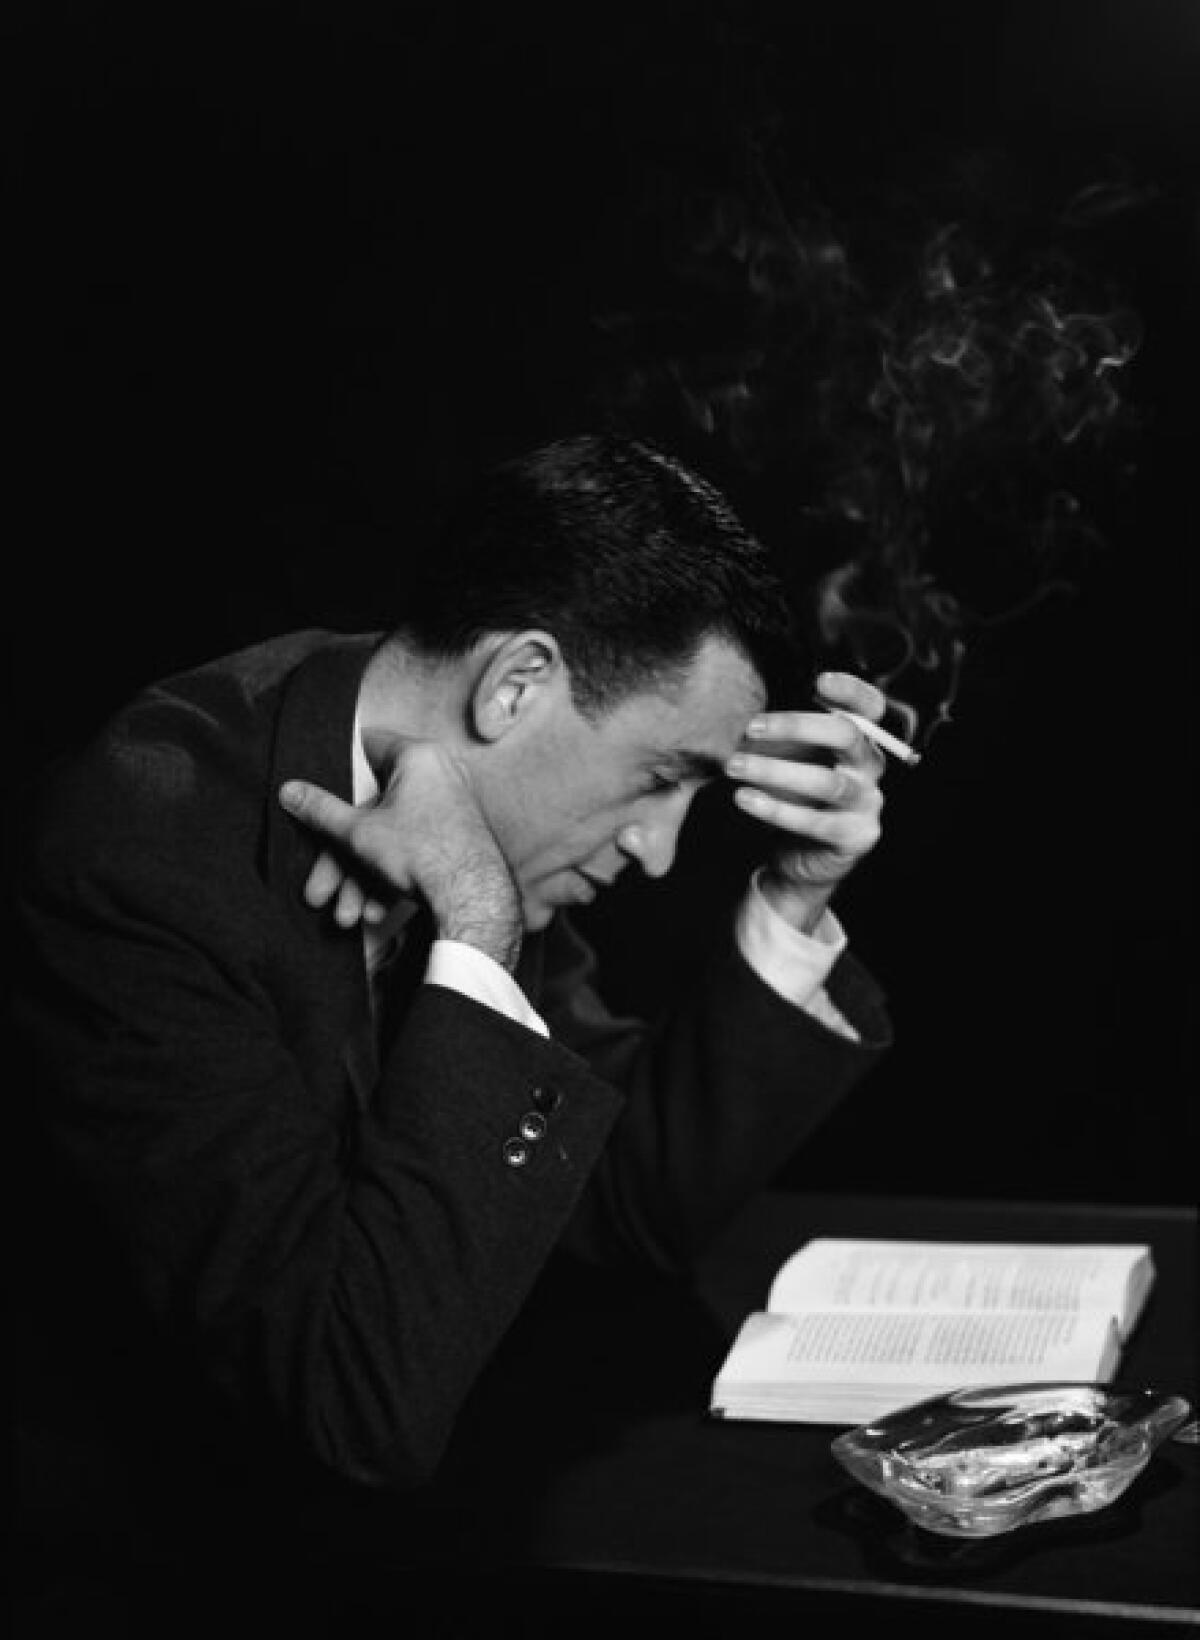 J.D. Salinger, in 1952, made the top 10 lists in 1963 with his book "Raise High the Roof Beam, Carpenters."